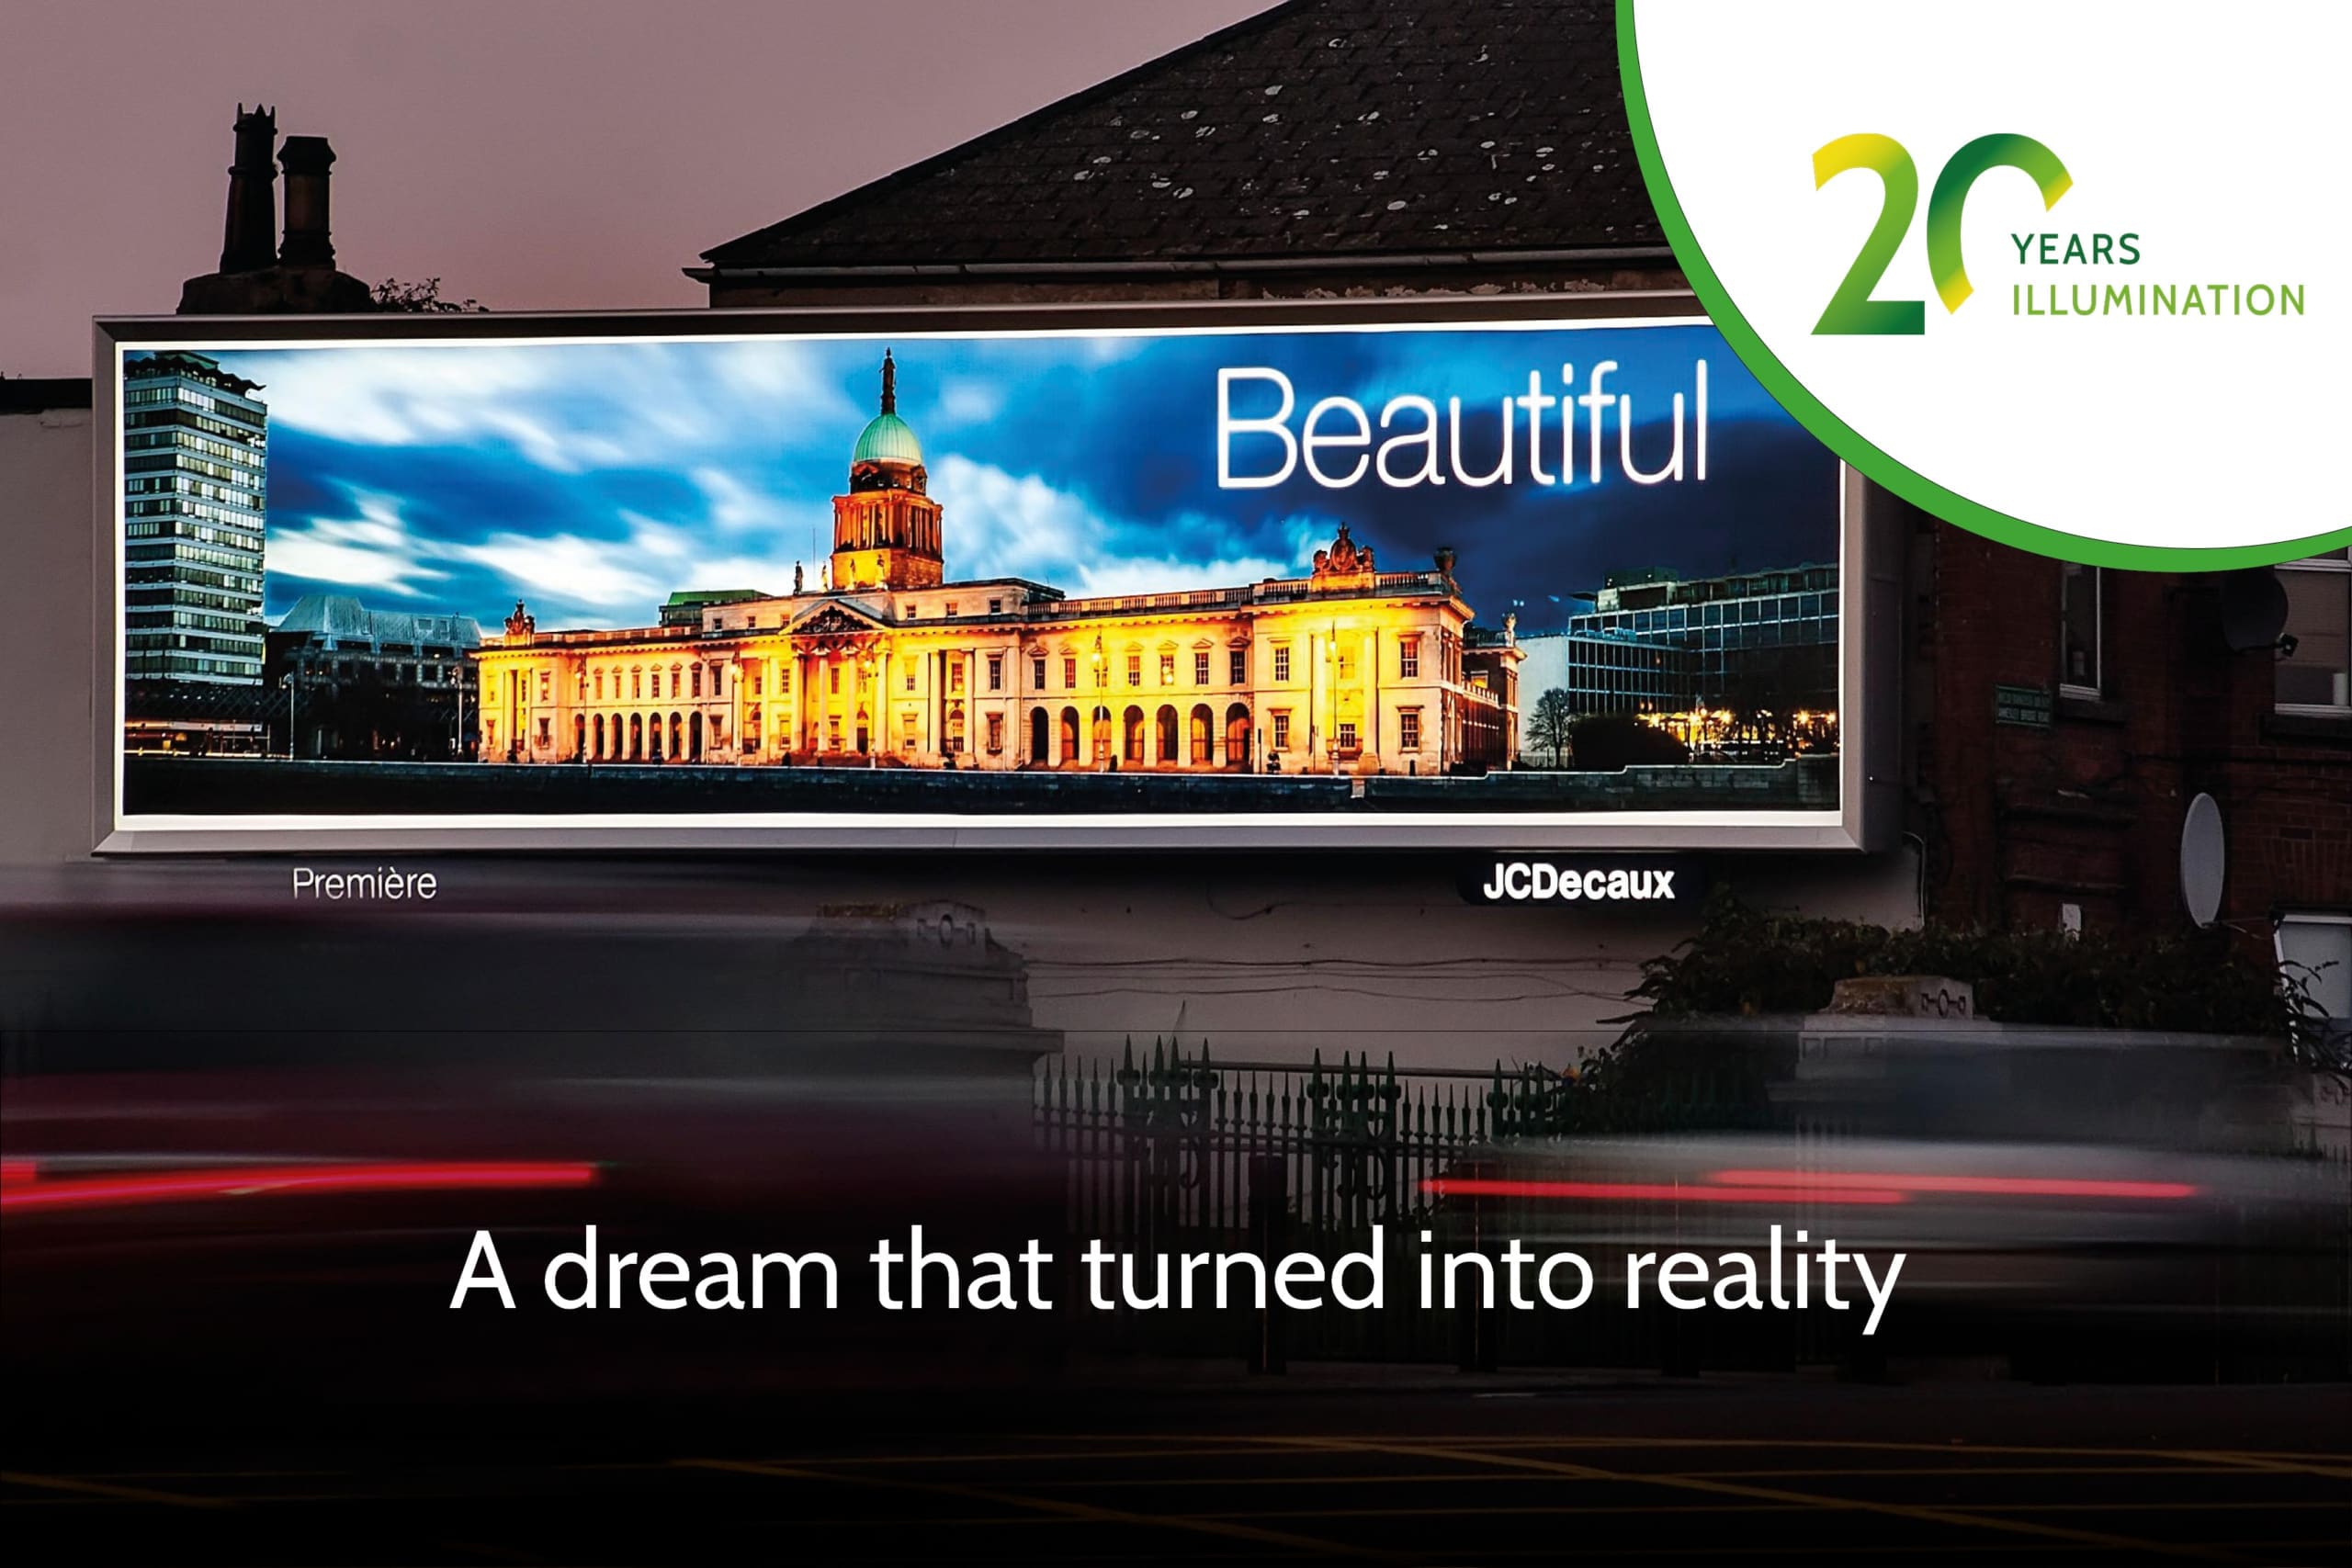 A large, backlit illuminated billboard at night showcases a beautifully lit historic building with a dome. The LED backlit display proudly reads "Beautiful" with the text below stating, "A dream that turned into reality." In the top right corner, a logo celebrates "20 Years Illumination.